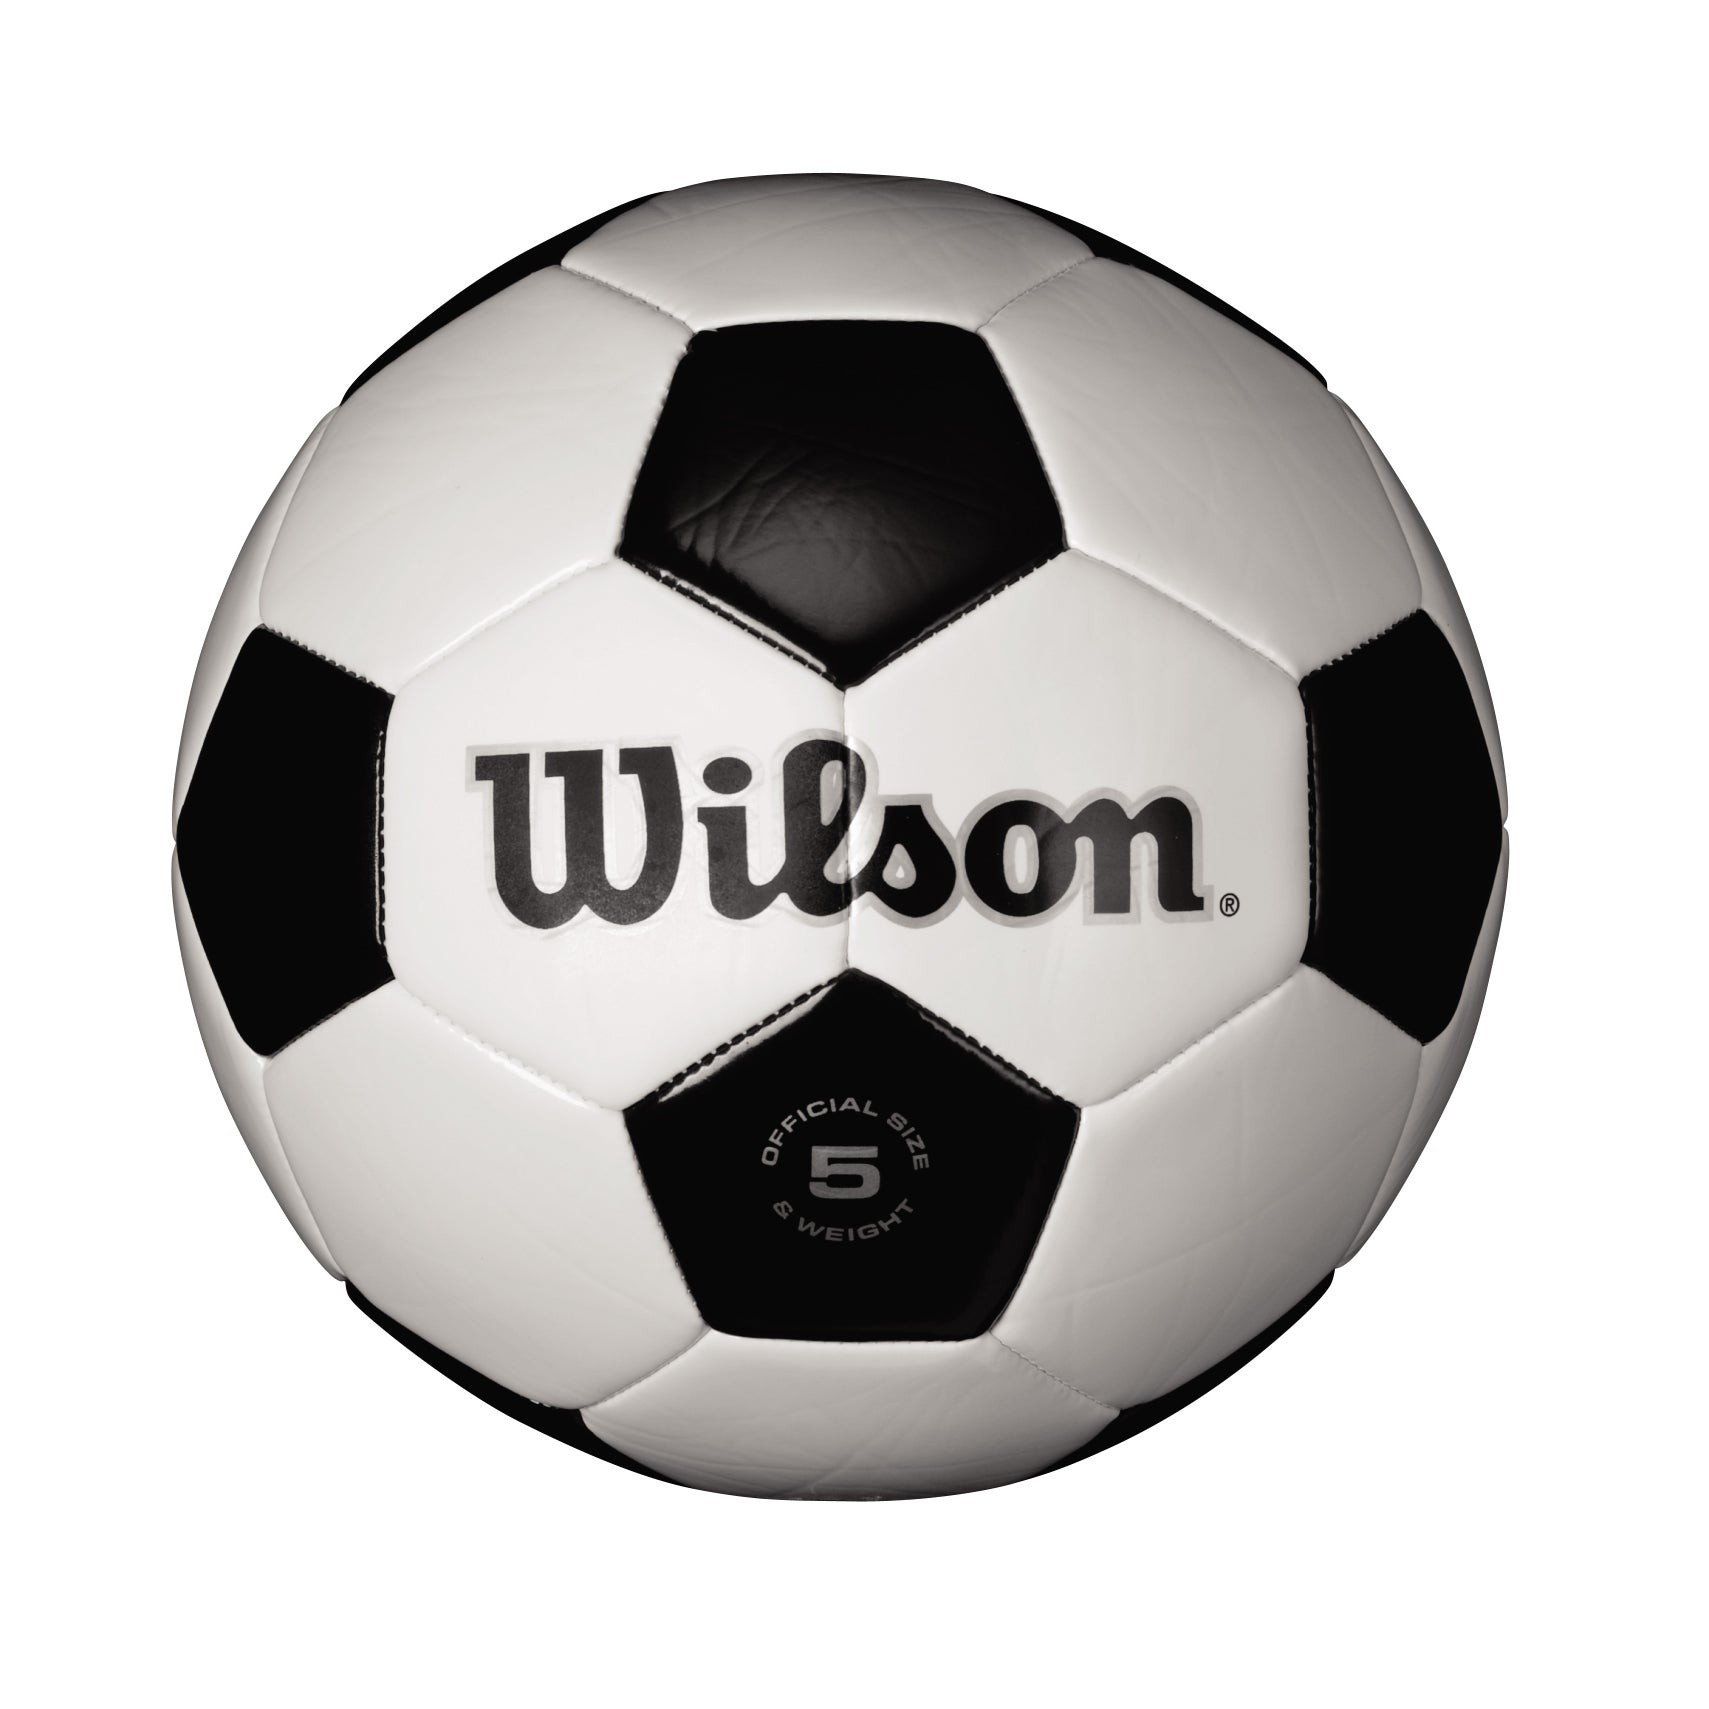 Traditional Black & White Soccer Ball Size 5 - Deflated